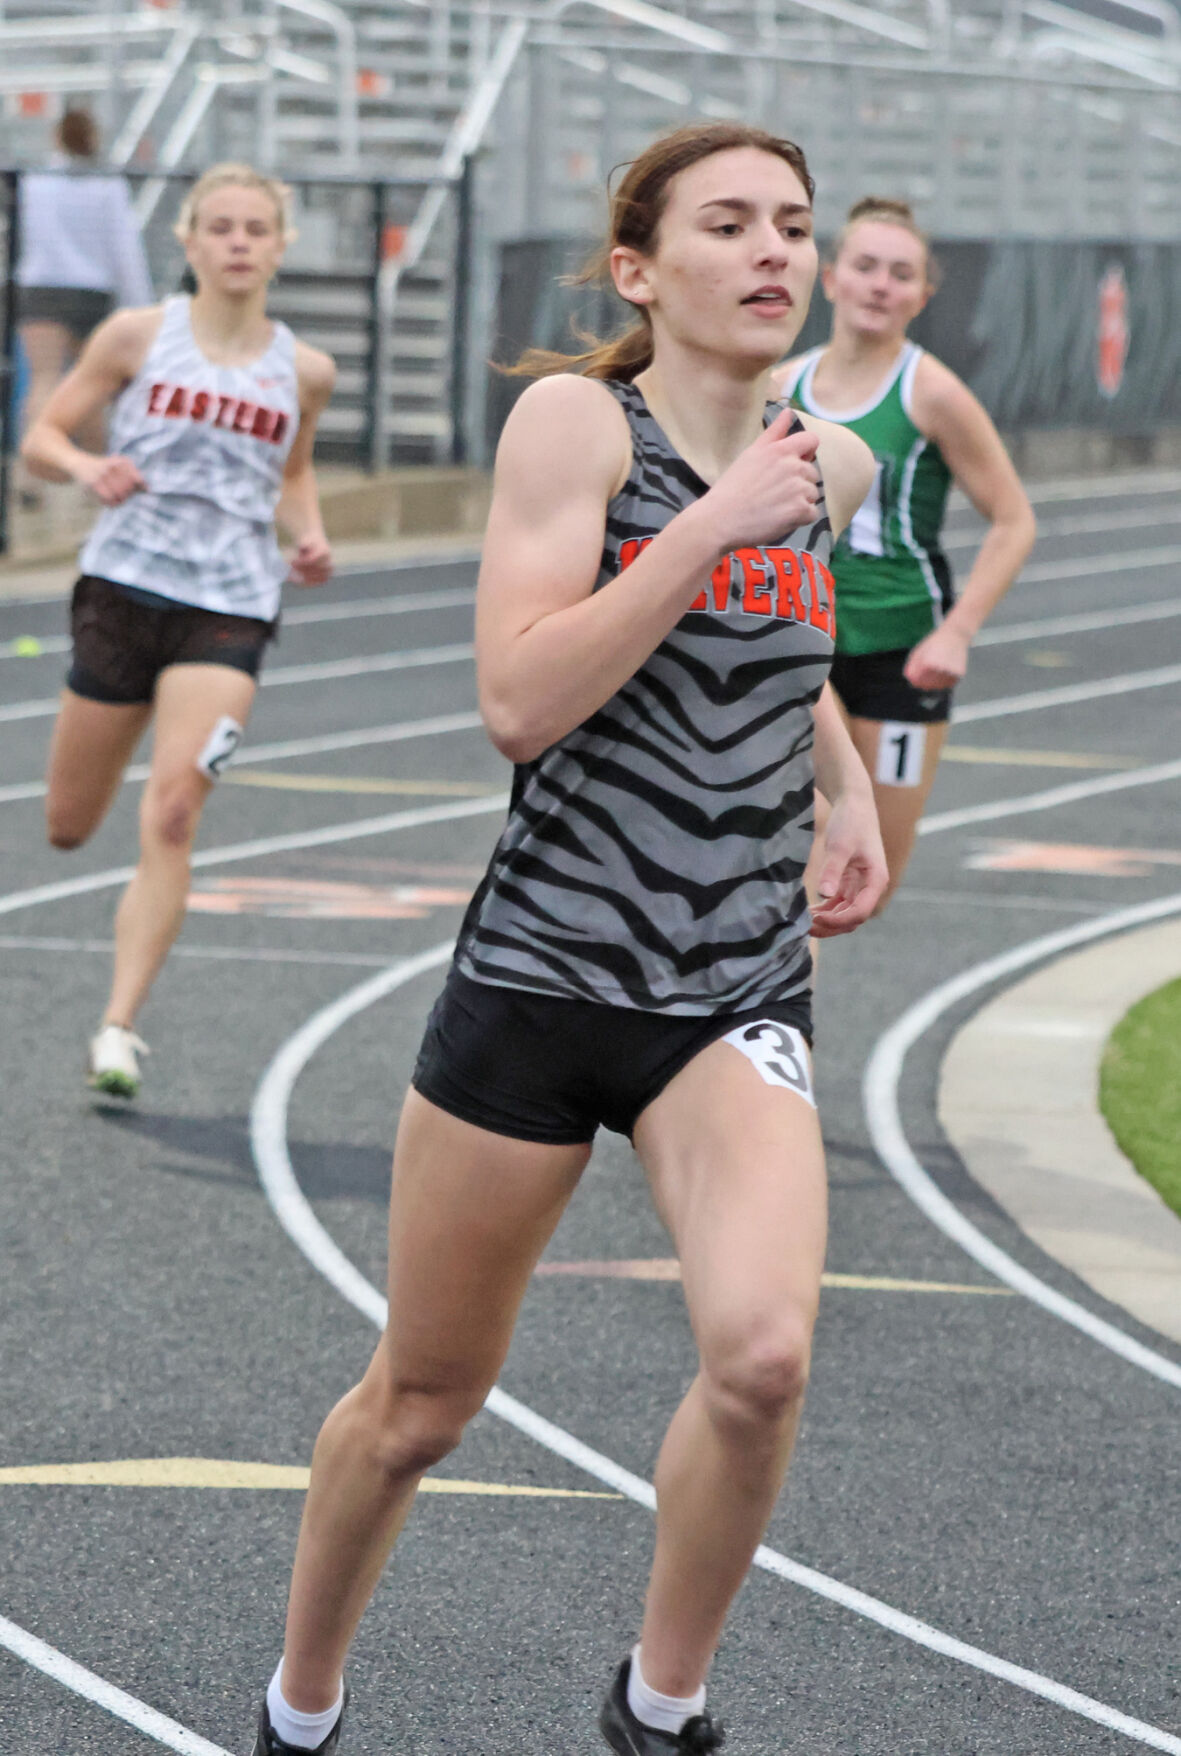 Led by O’Bryant, Lady Tigers secure runner-up trophy at Raidiger Invite